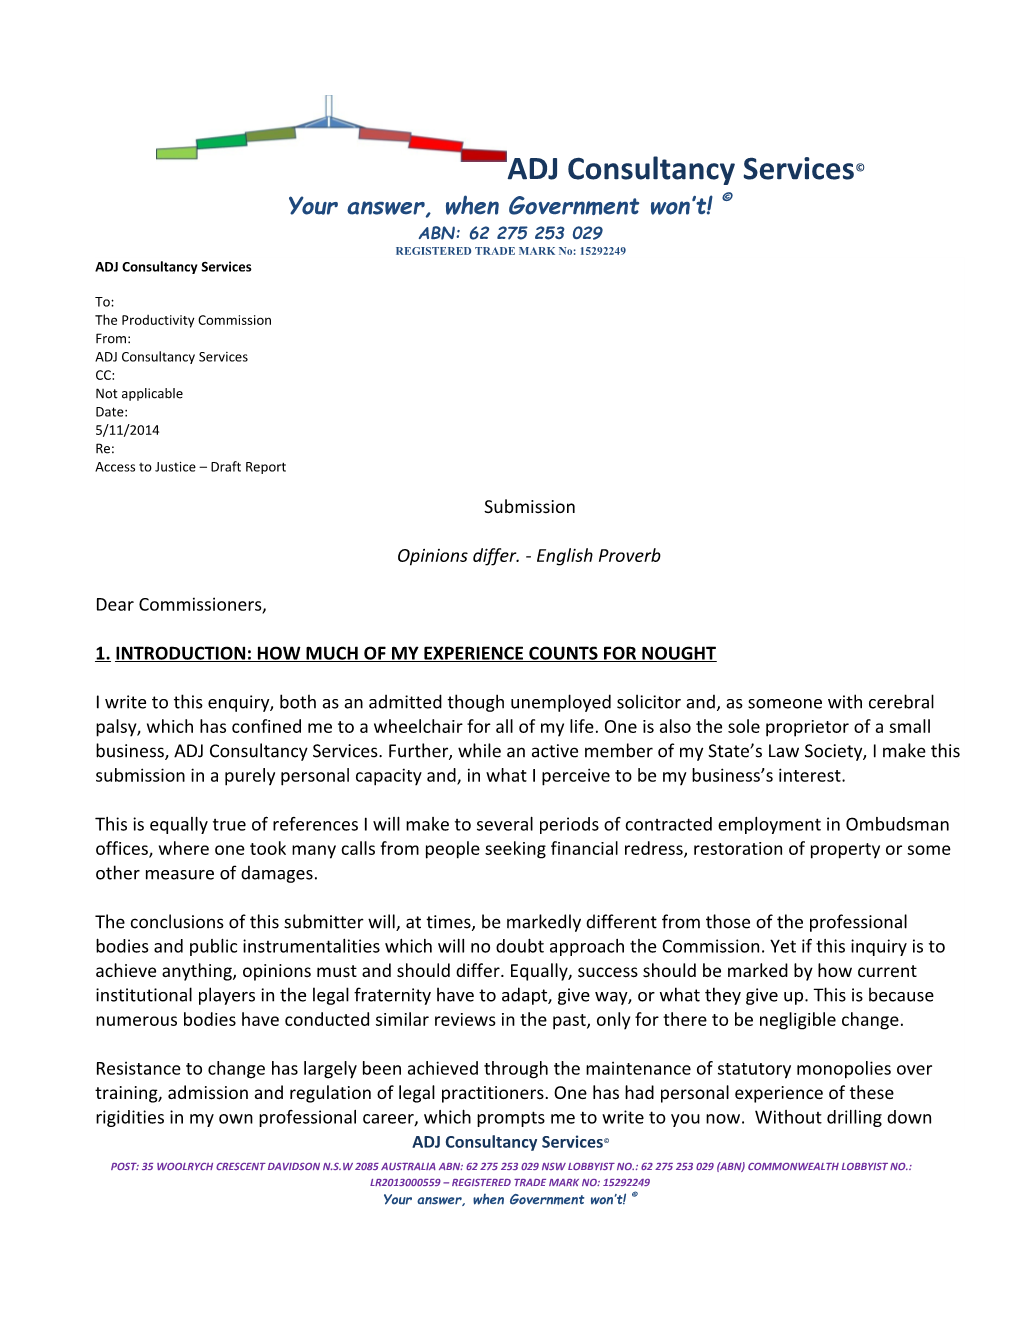 Submission DR164 - ADJ Consultancy Services - Access to Justice Arrangements - Public Inquiry